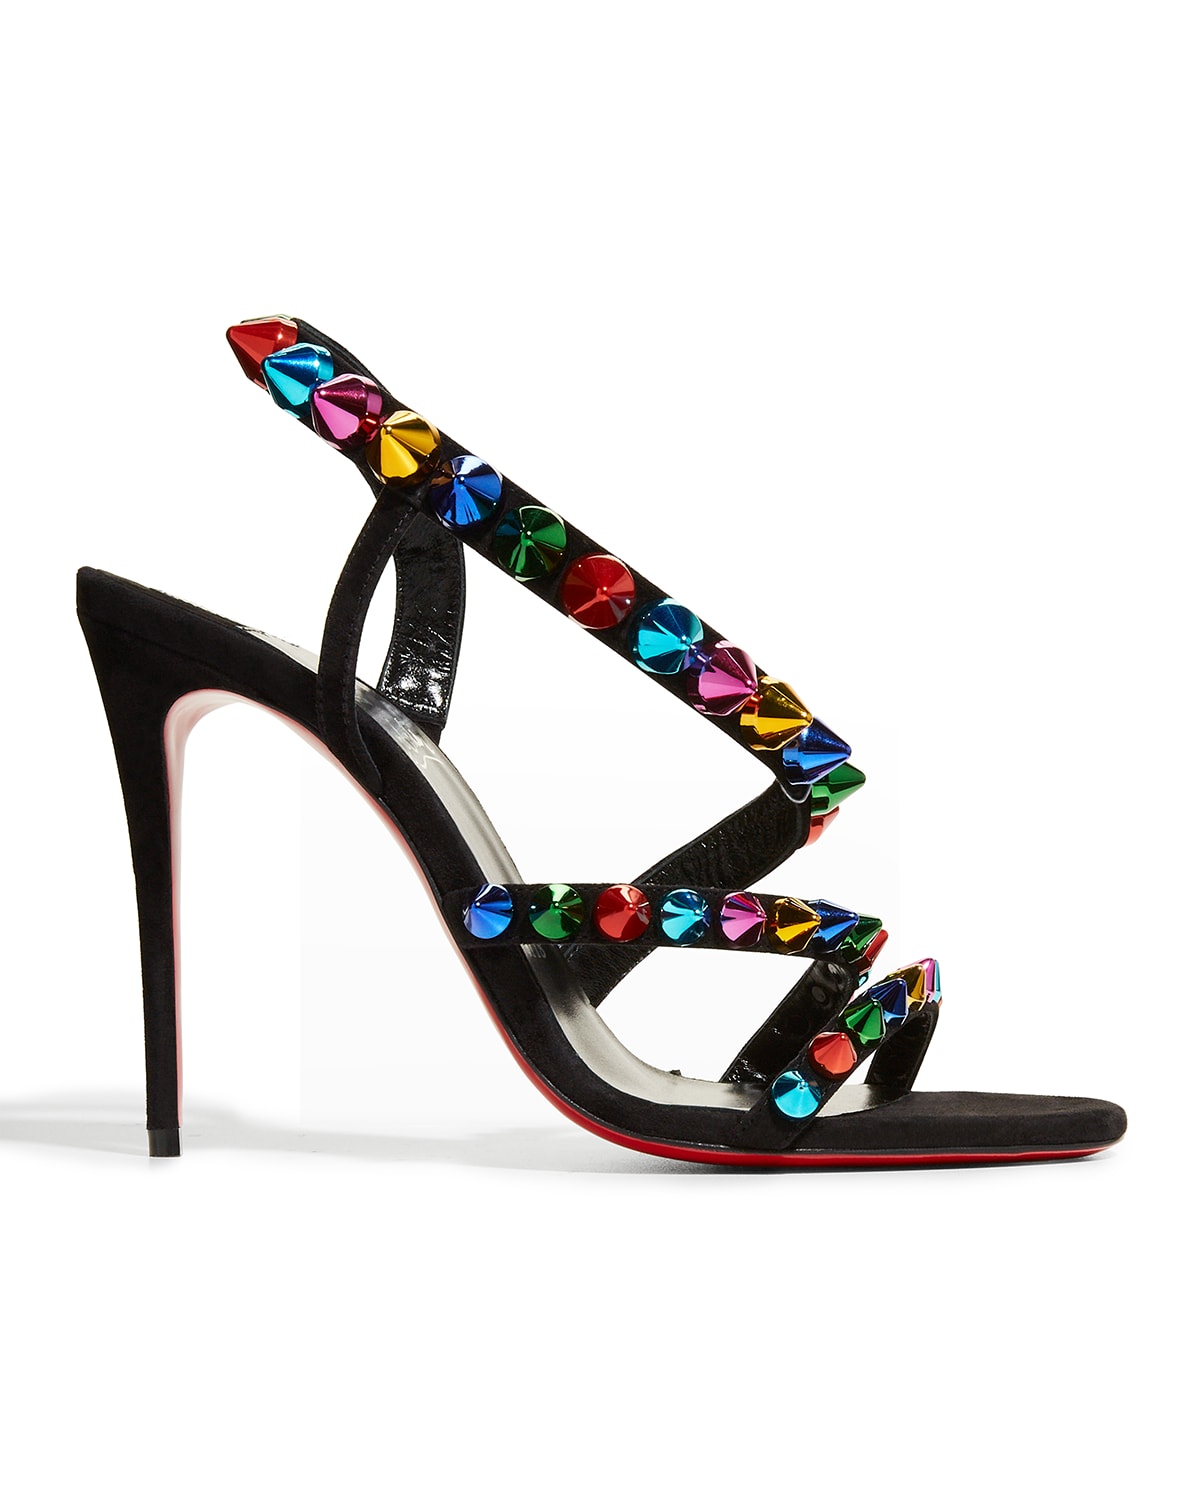 Christian Louboutin Spikita Studded Red Sole Stiletto Sandals